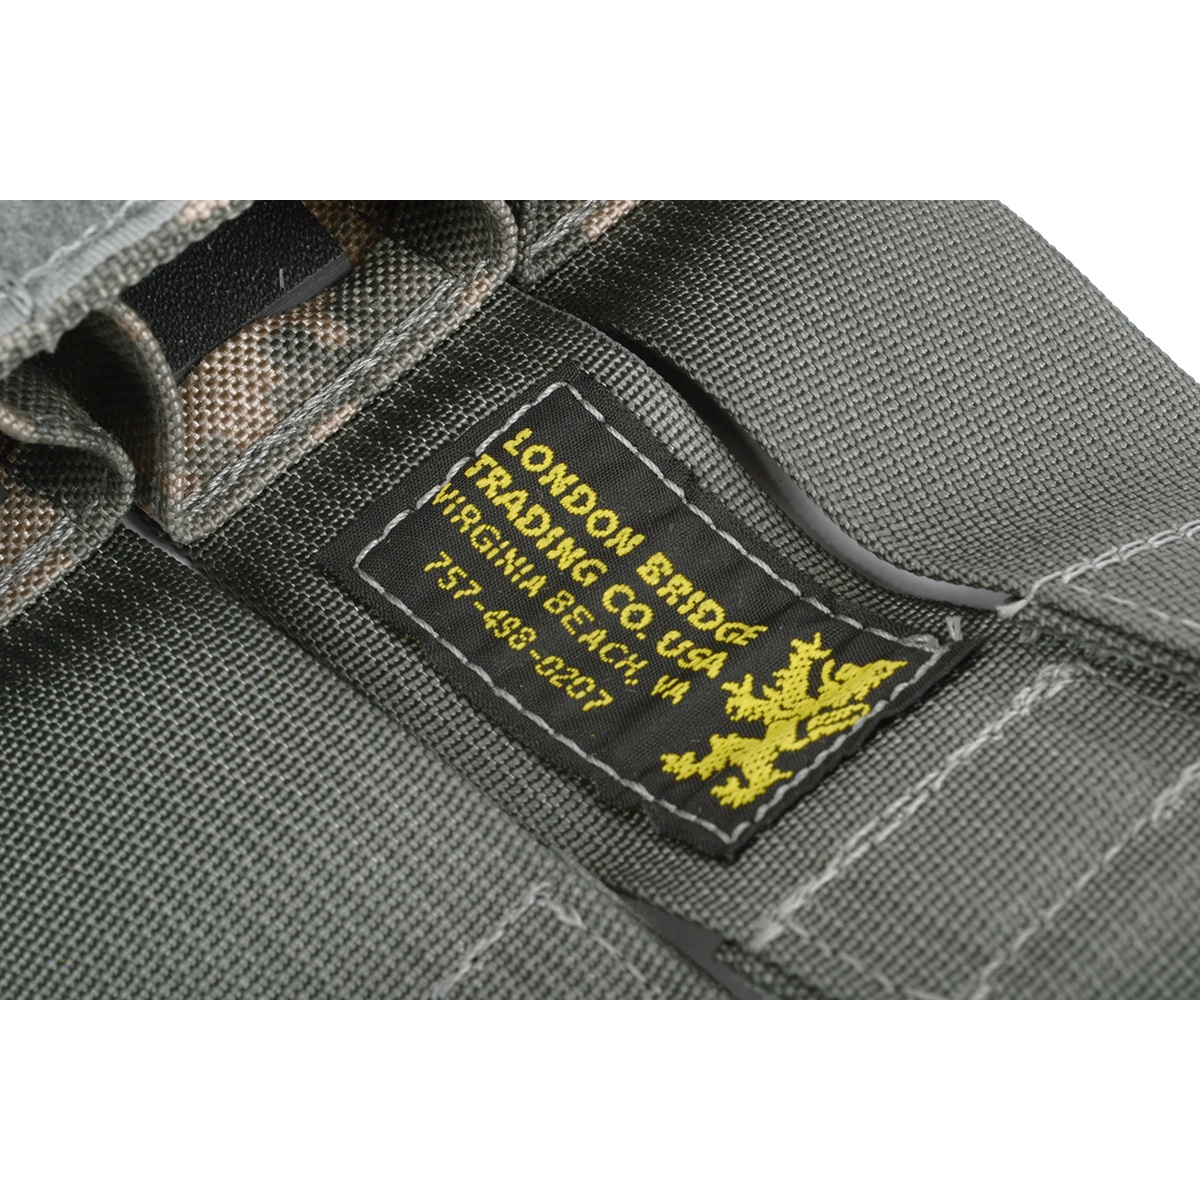 London Bridge Trading ACU MOLLE Pistol Mag Pouch - Holds 3 Magazines ...